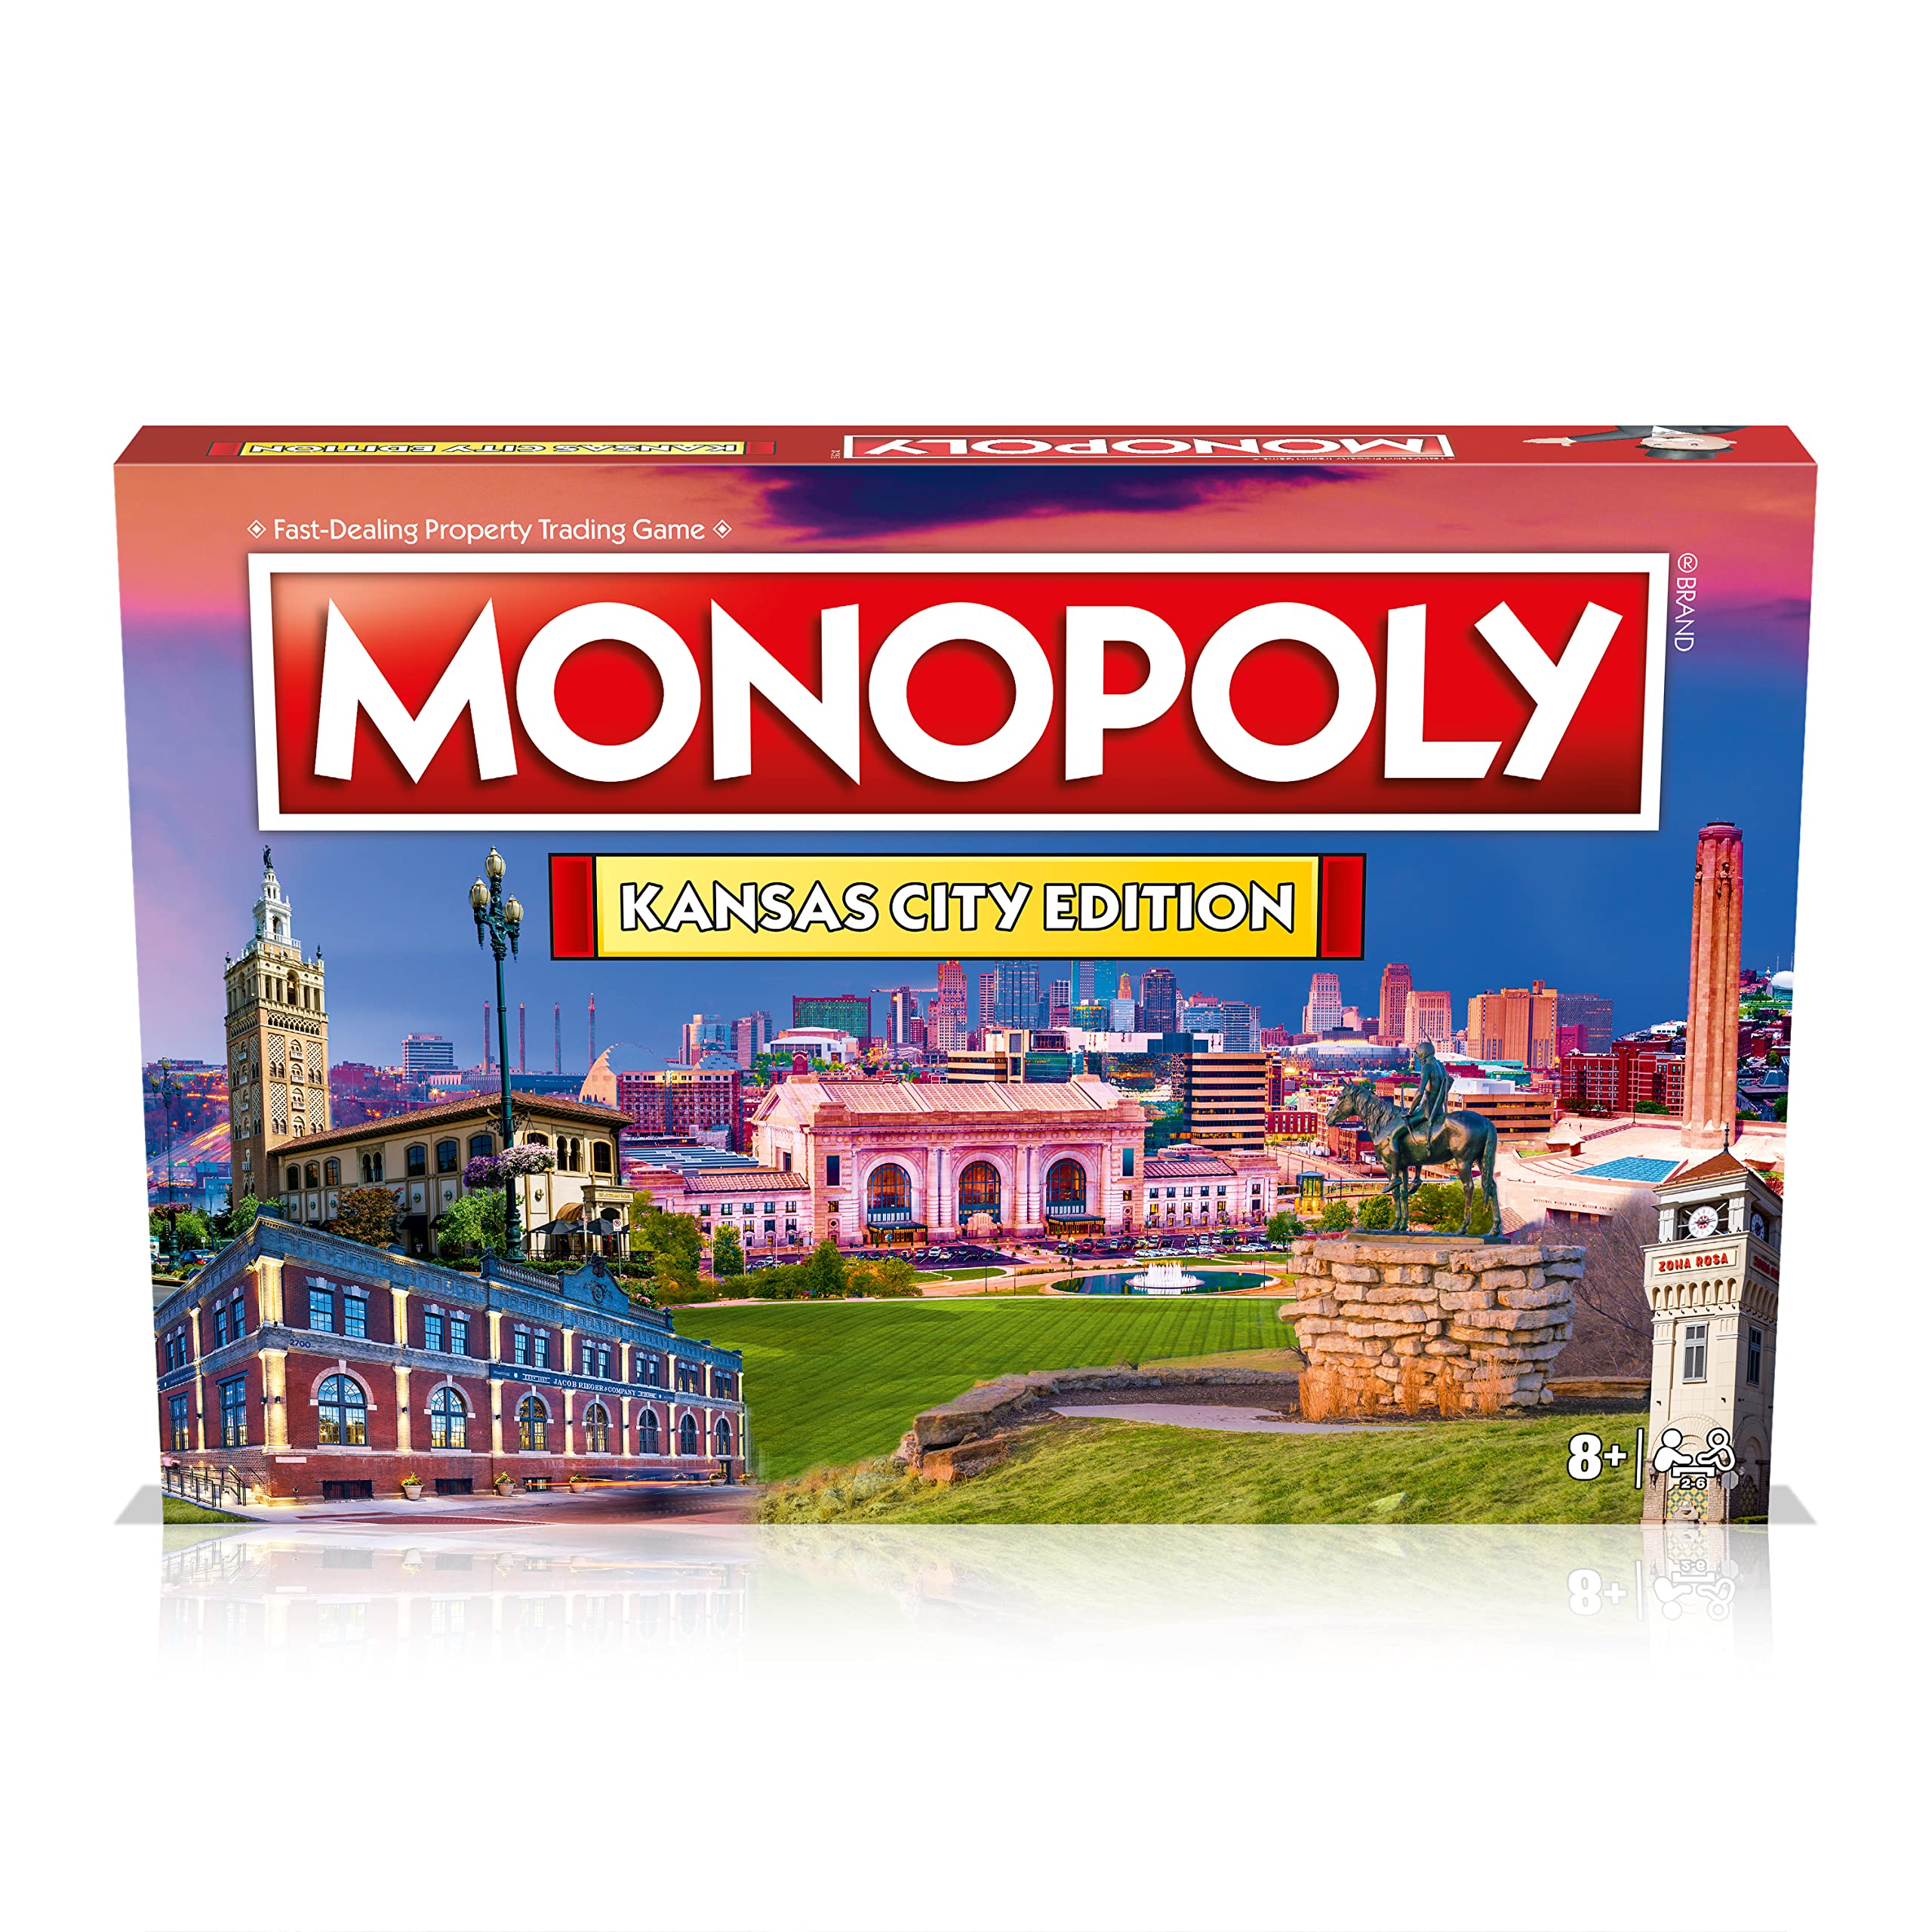 Monopoly Kansas City Edition, Family Board Game for 2-6 Players Ages 8 and Up